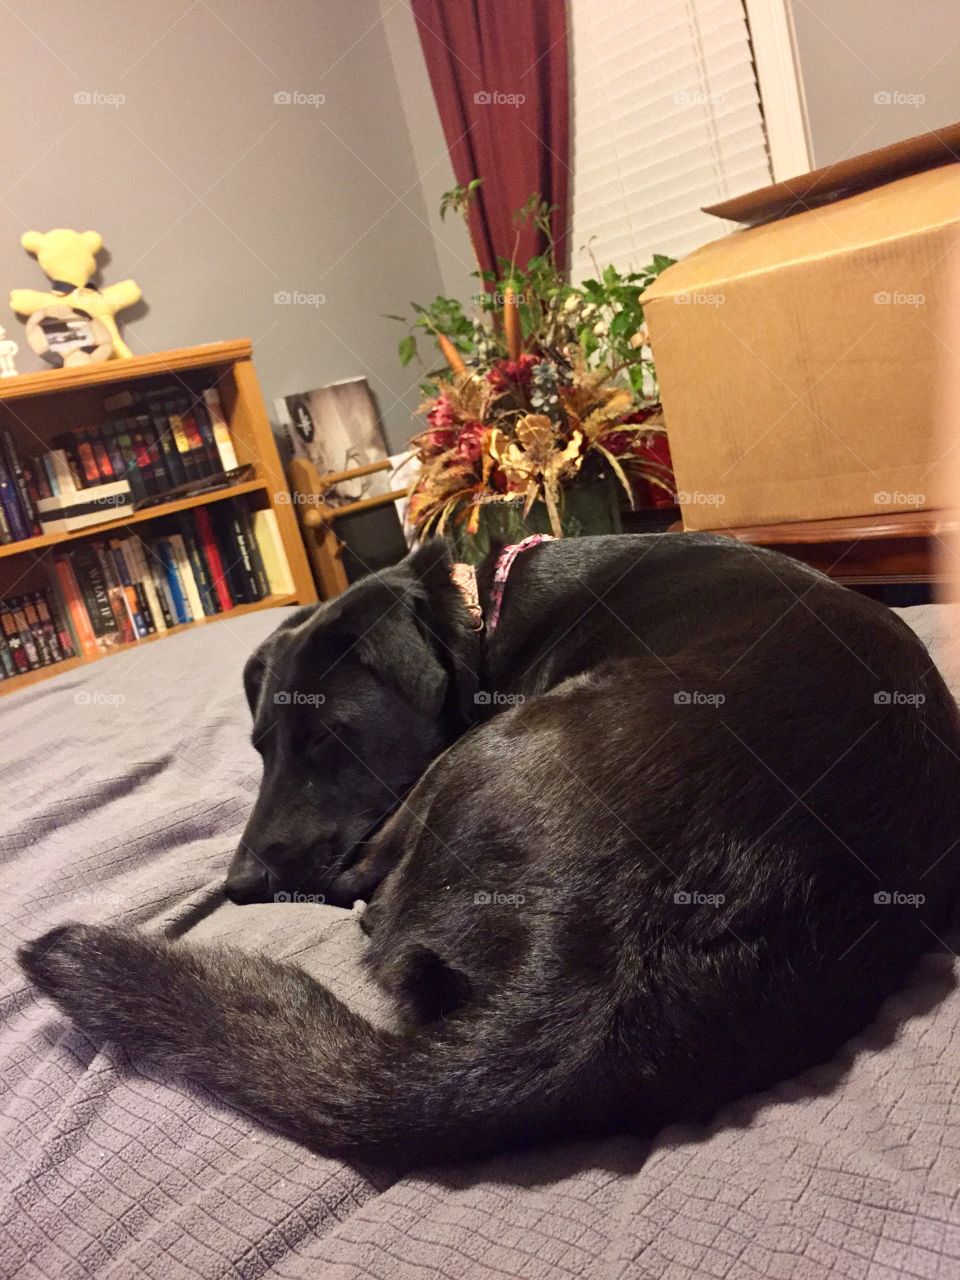 Black lab mixed curled up on bed napping 